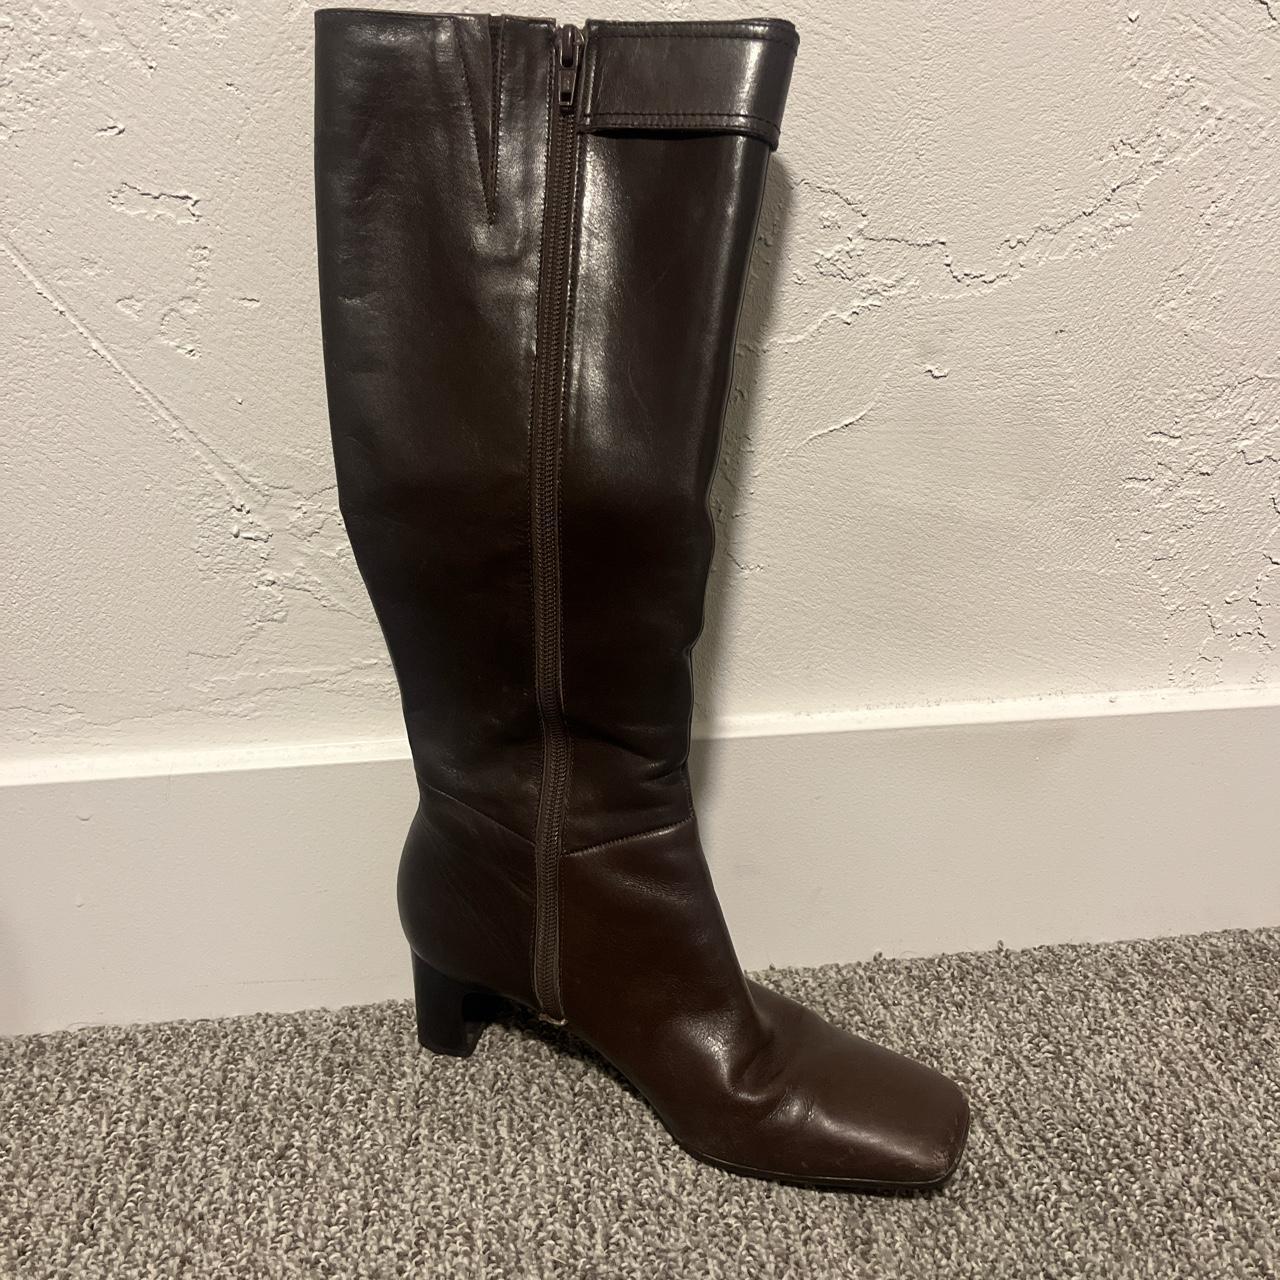 & Other Stories Women's Boots